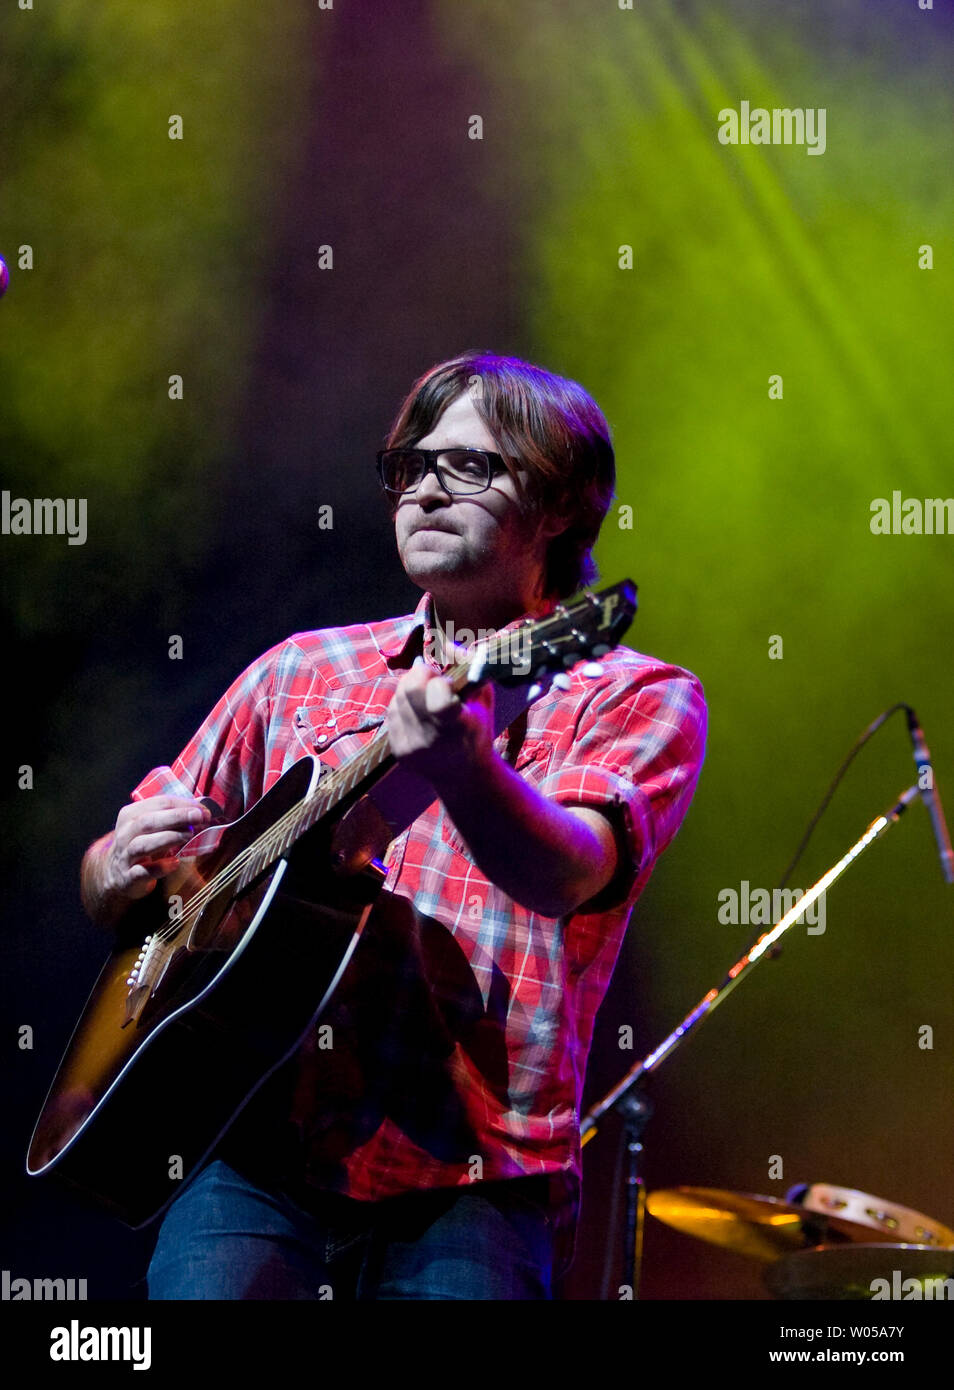 Death Cab For Cutie's guitarist  Ben Gibbard performs at a benefit show for the Seeds of Compassion initiative on April 11, 2008 at the Key Arena in Seattle. The Concert is part of the five-day celebration that centers on the Dalai Lama's visit. (UPI Photo/Jim Bryant) Stock Photo